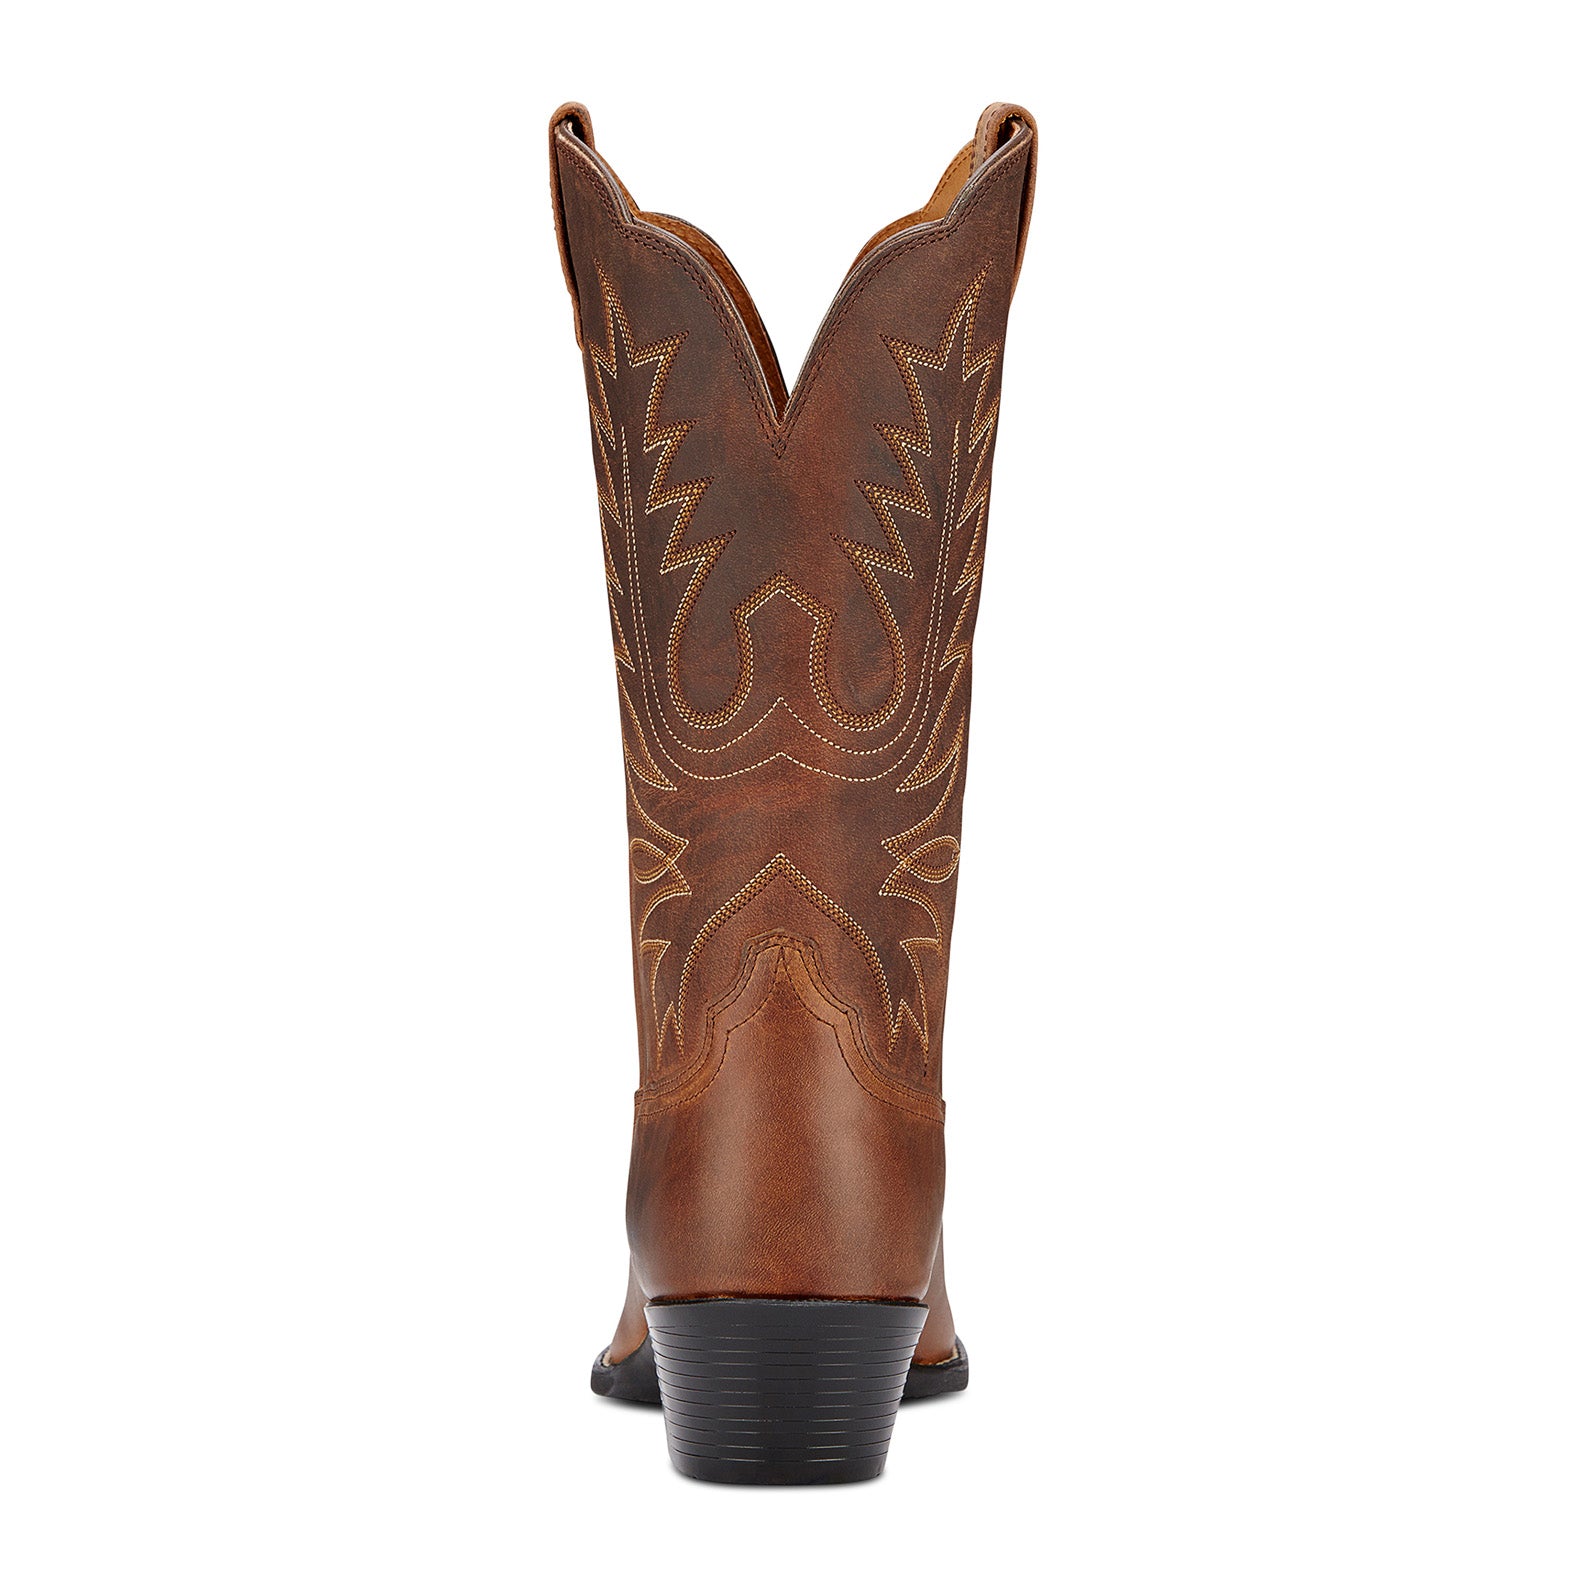 Ariat Womens Heritage R Toe Western Boots